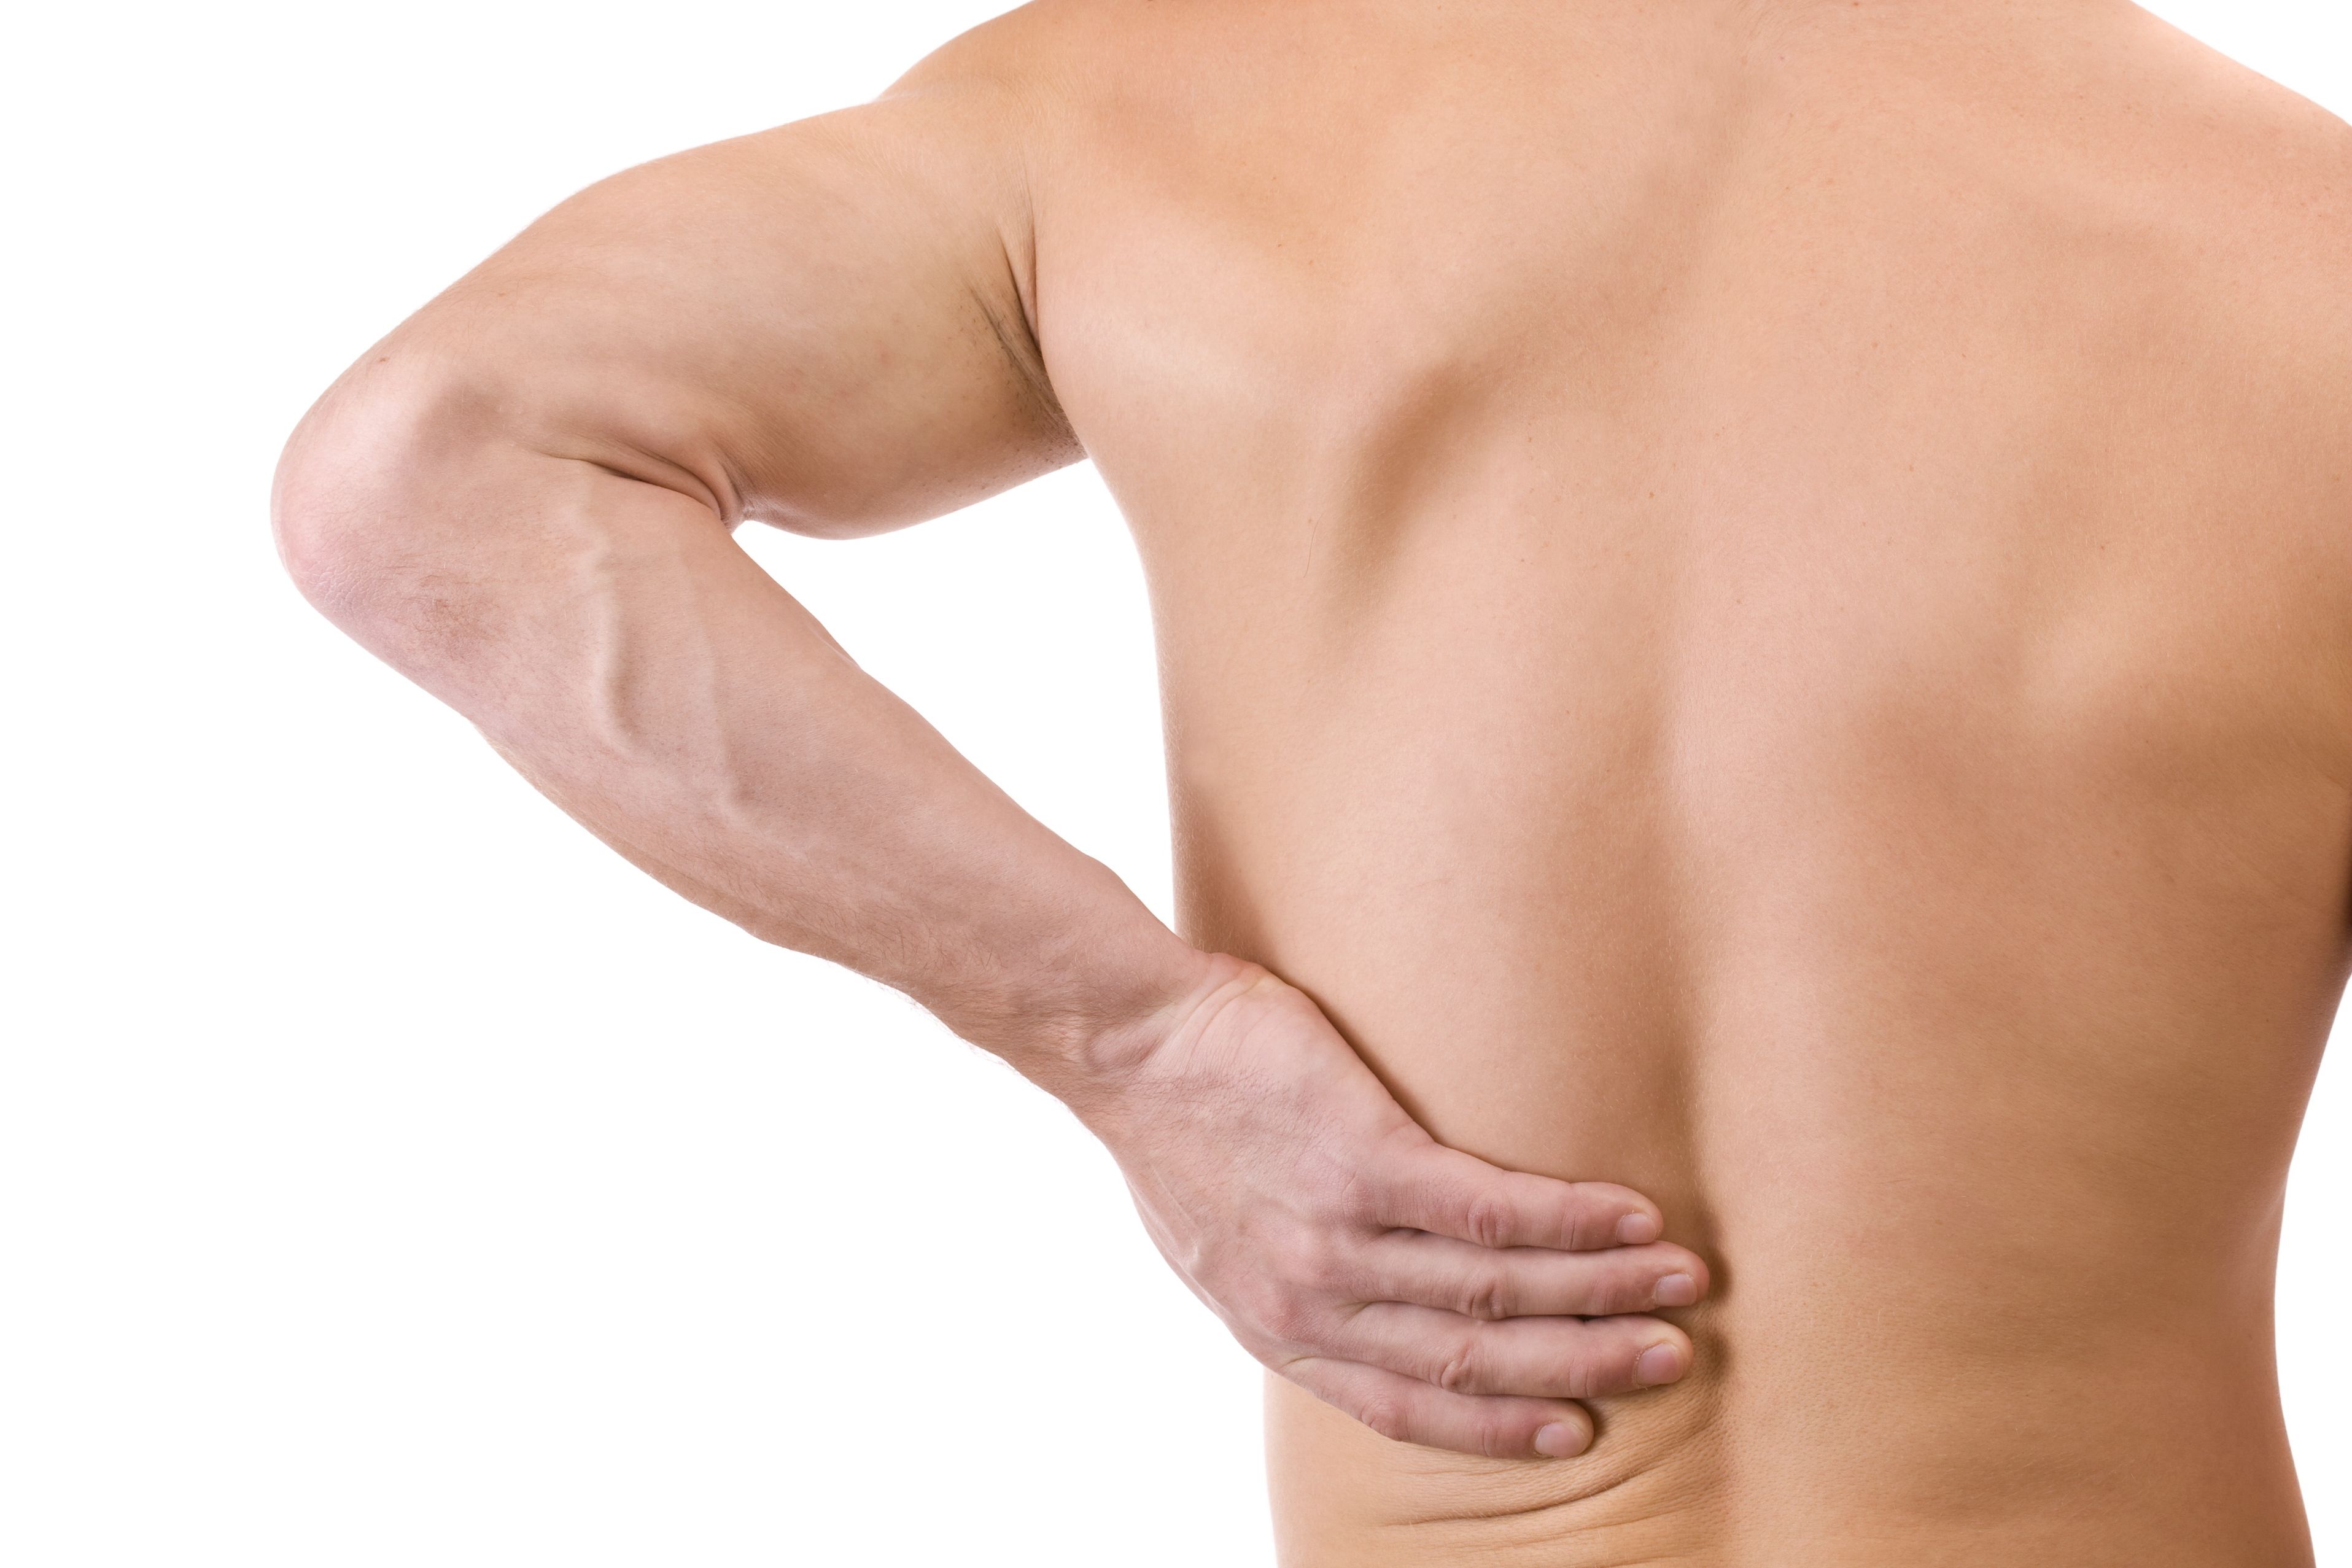 How To Get Rid of Lower Back Pain With Exercise